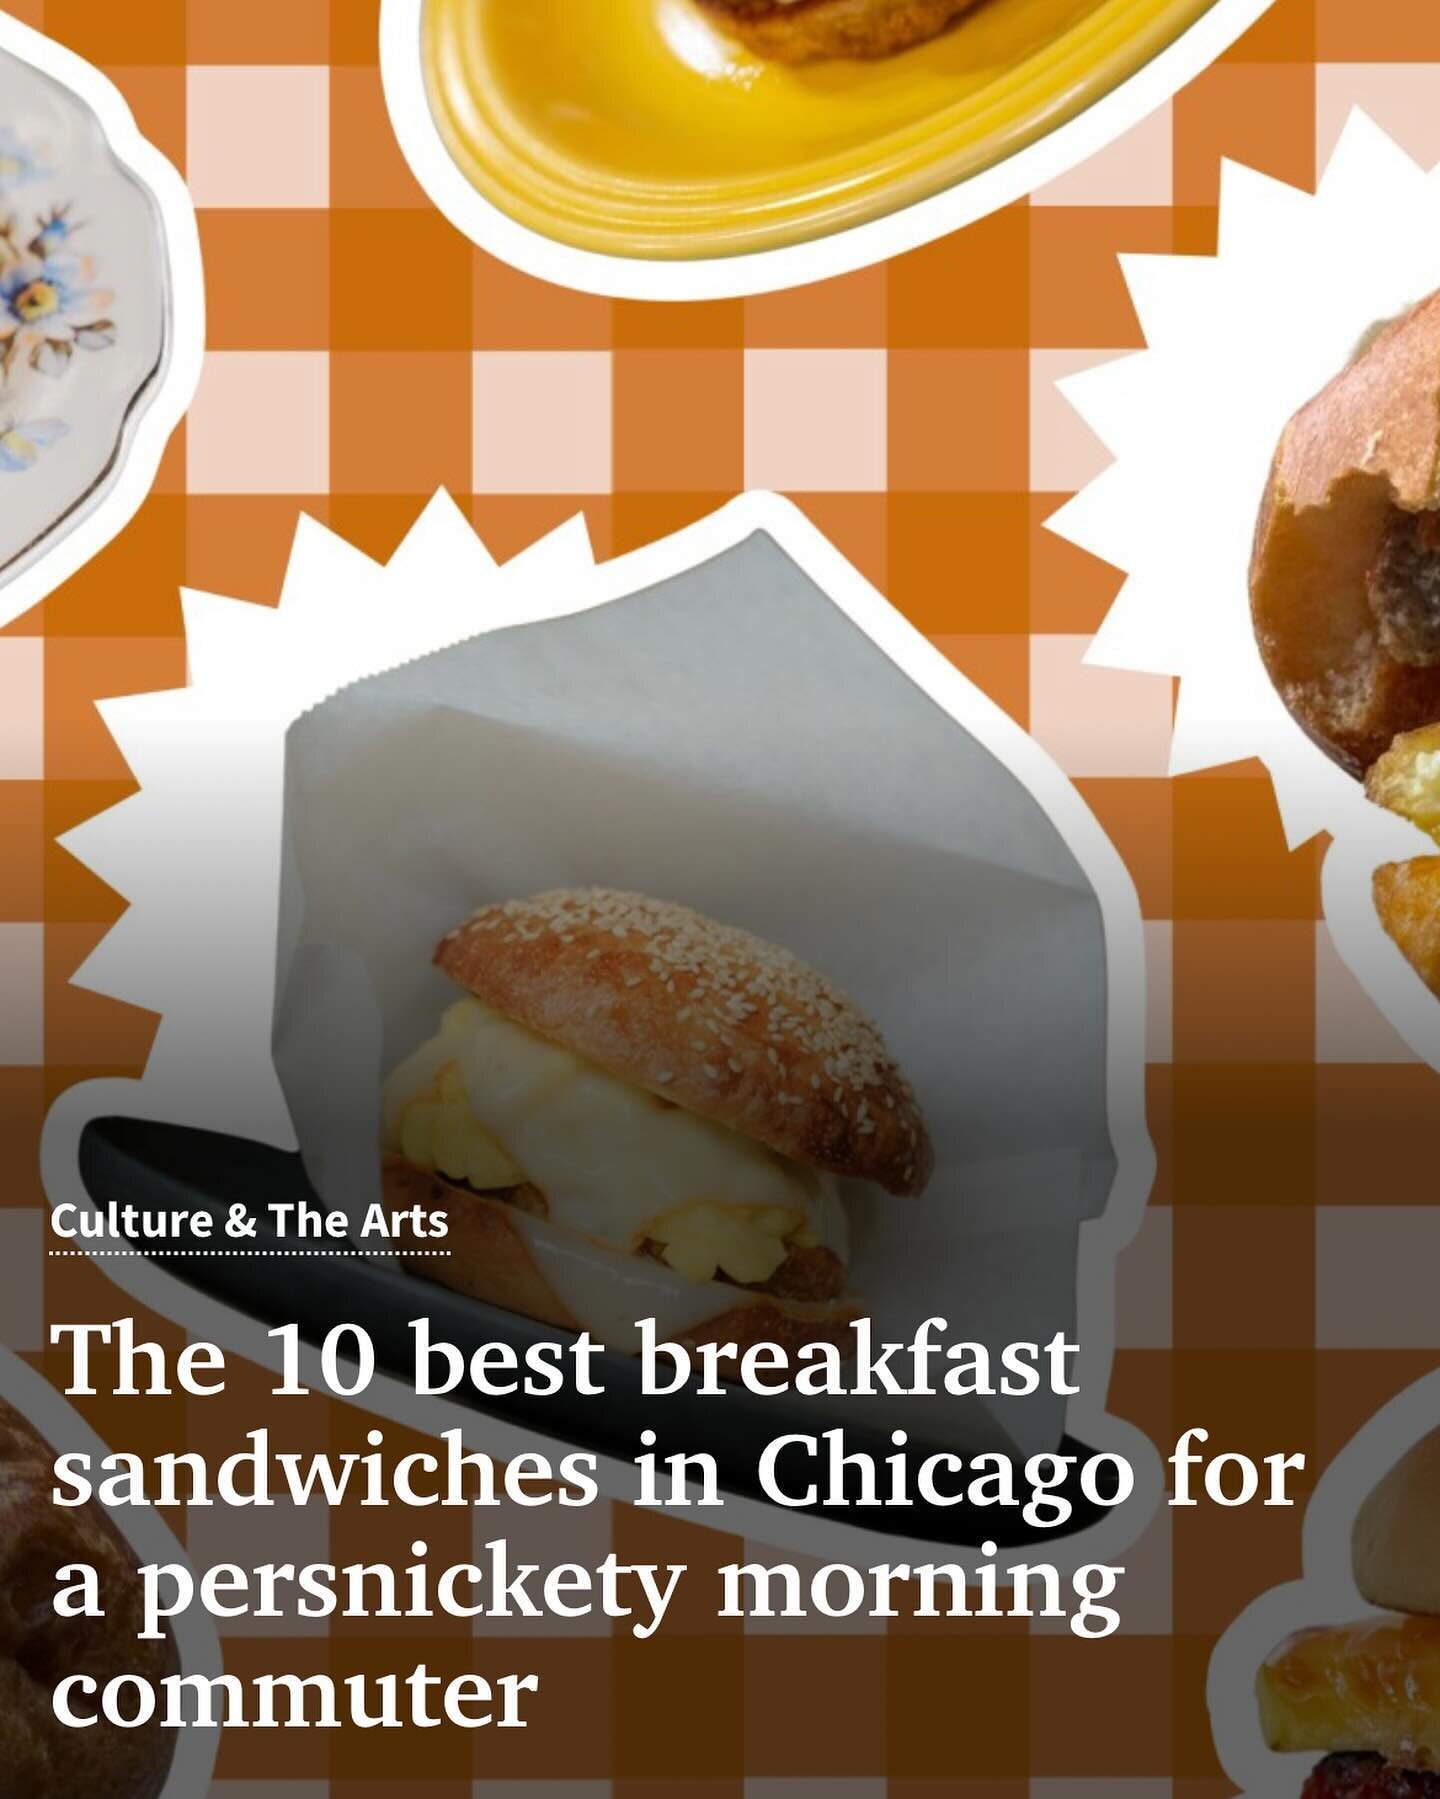 So many egg-cellent sandos!  We&rsquo;re honored to be included, thanks so much @edible_words @wbezchicago.  Link in stories!